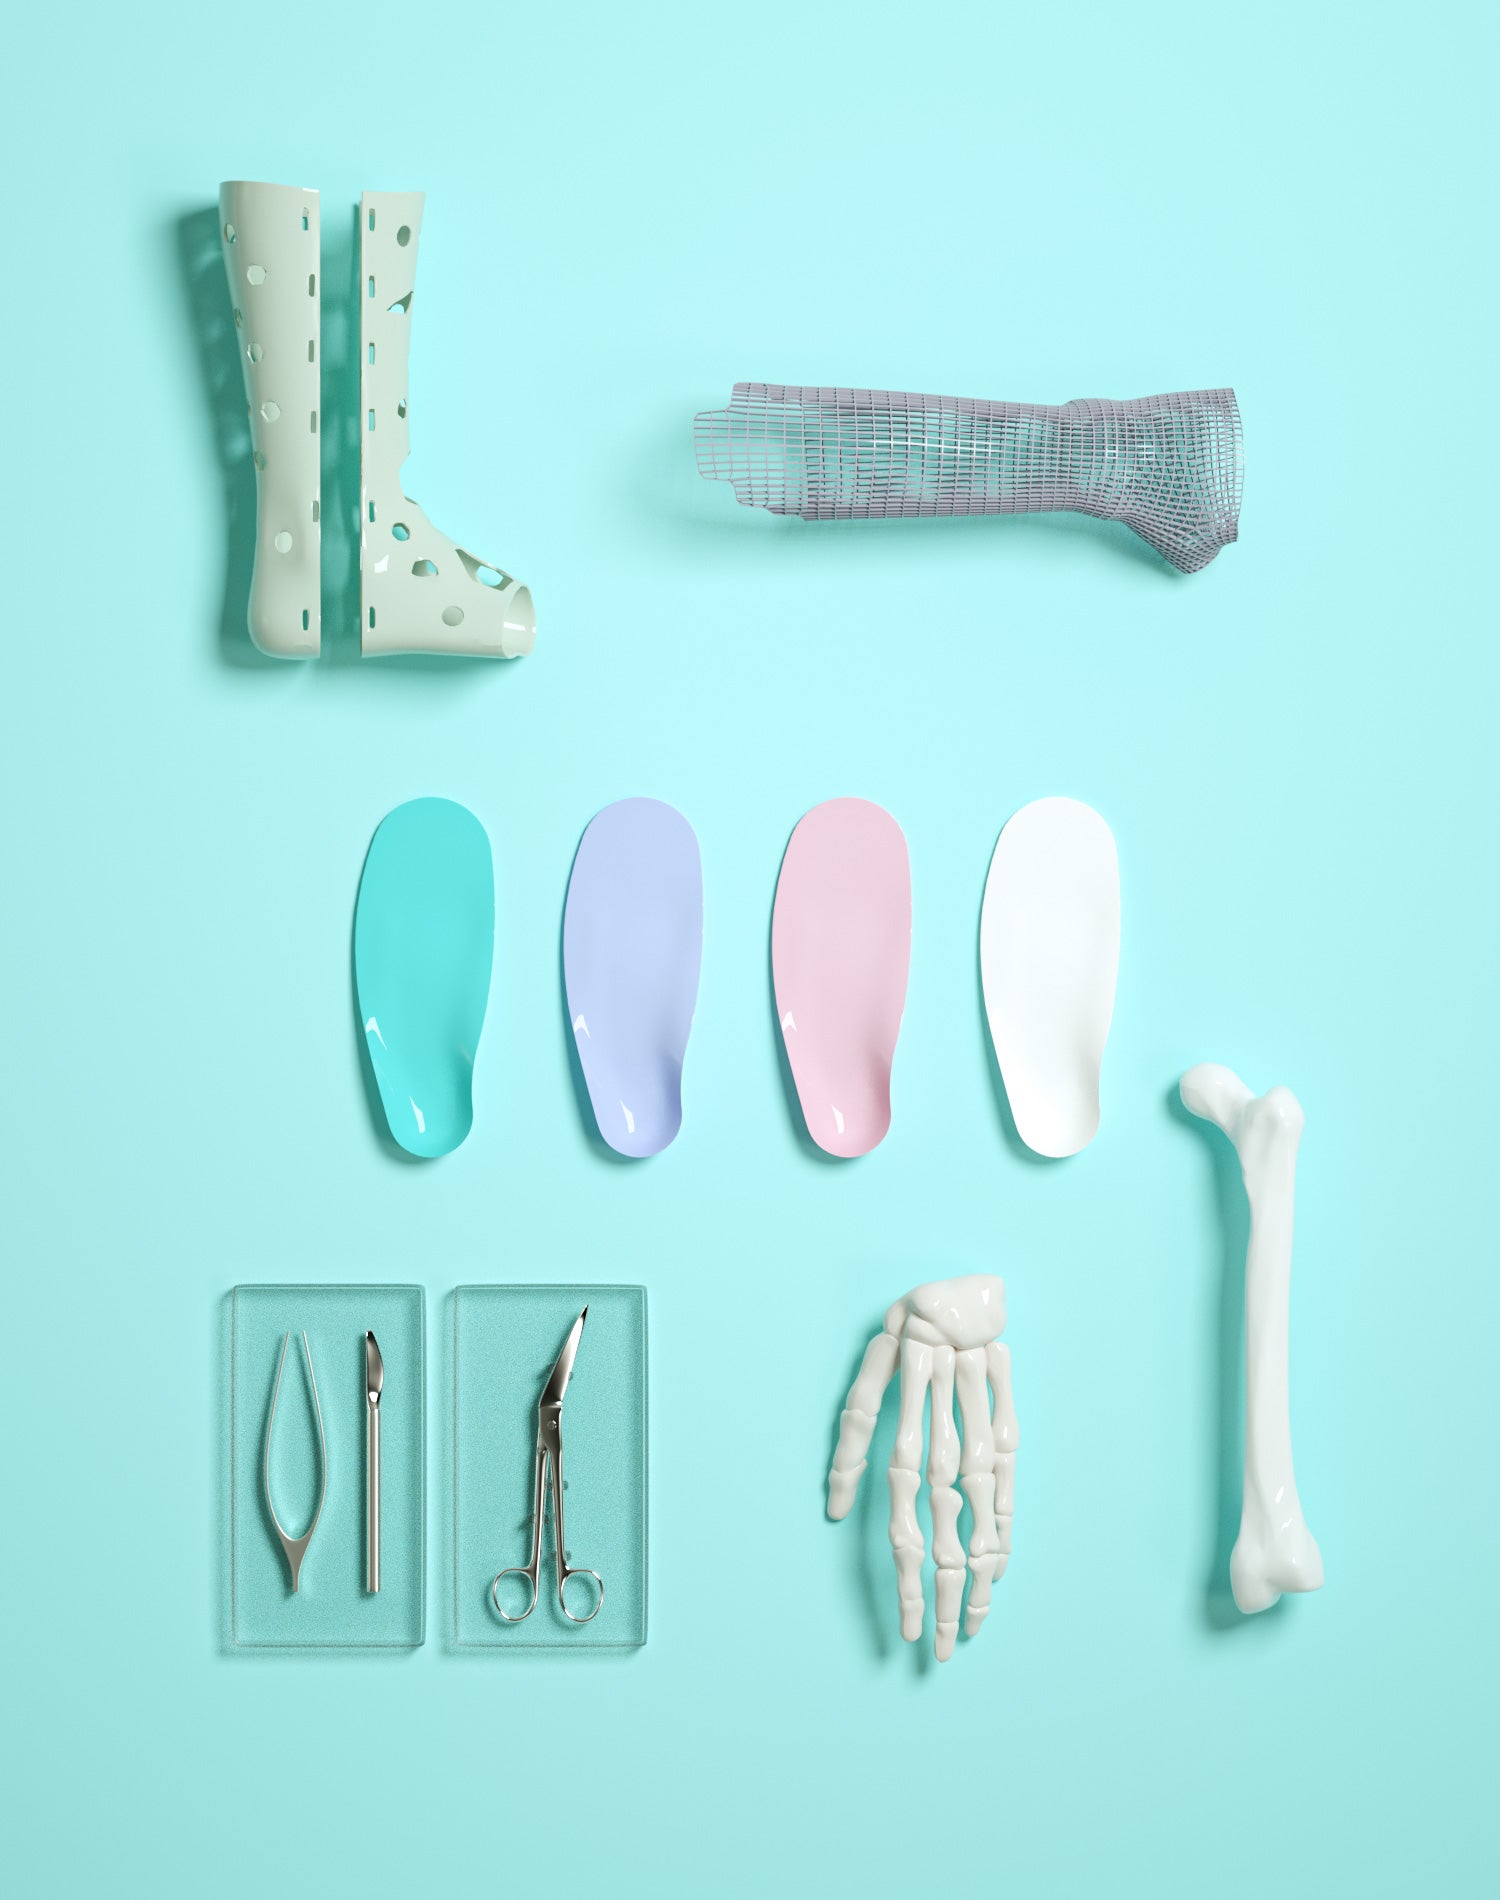 3D printed splint, insole, medical instrument for use healthcare